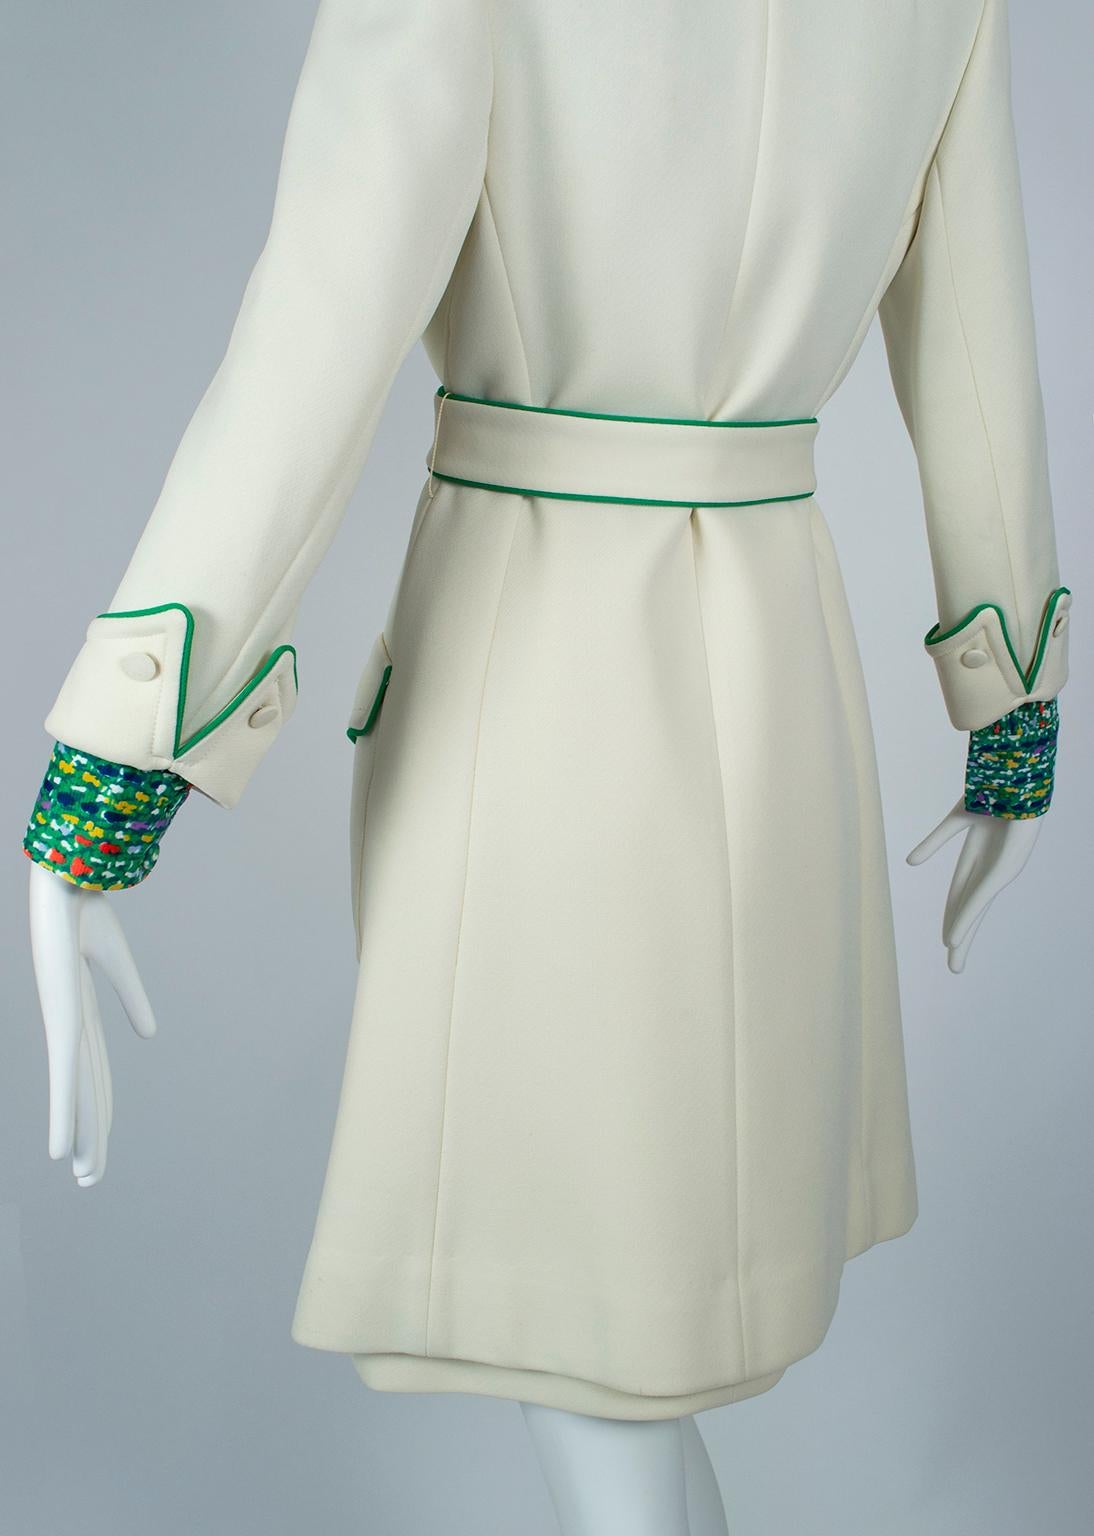 Lilli Ann Springtime Air Hostess Dress Suit with Piped Trench Coat - XS, 1960s 8